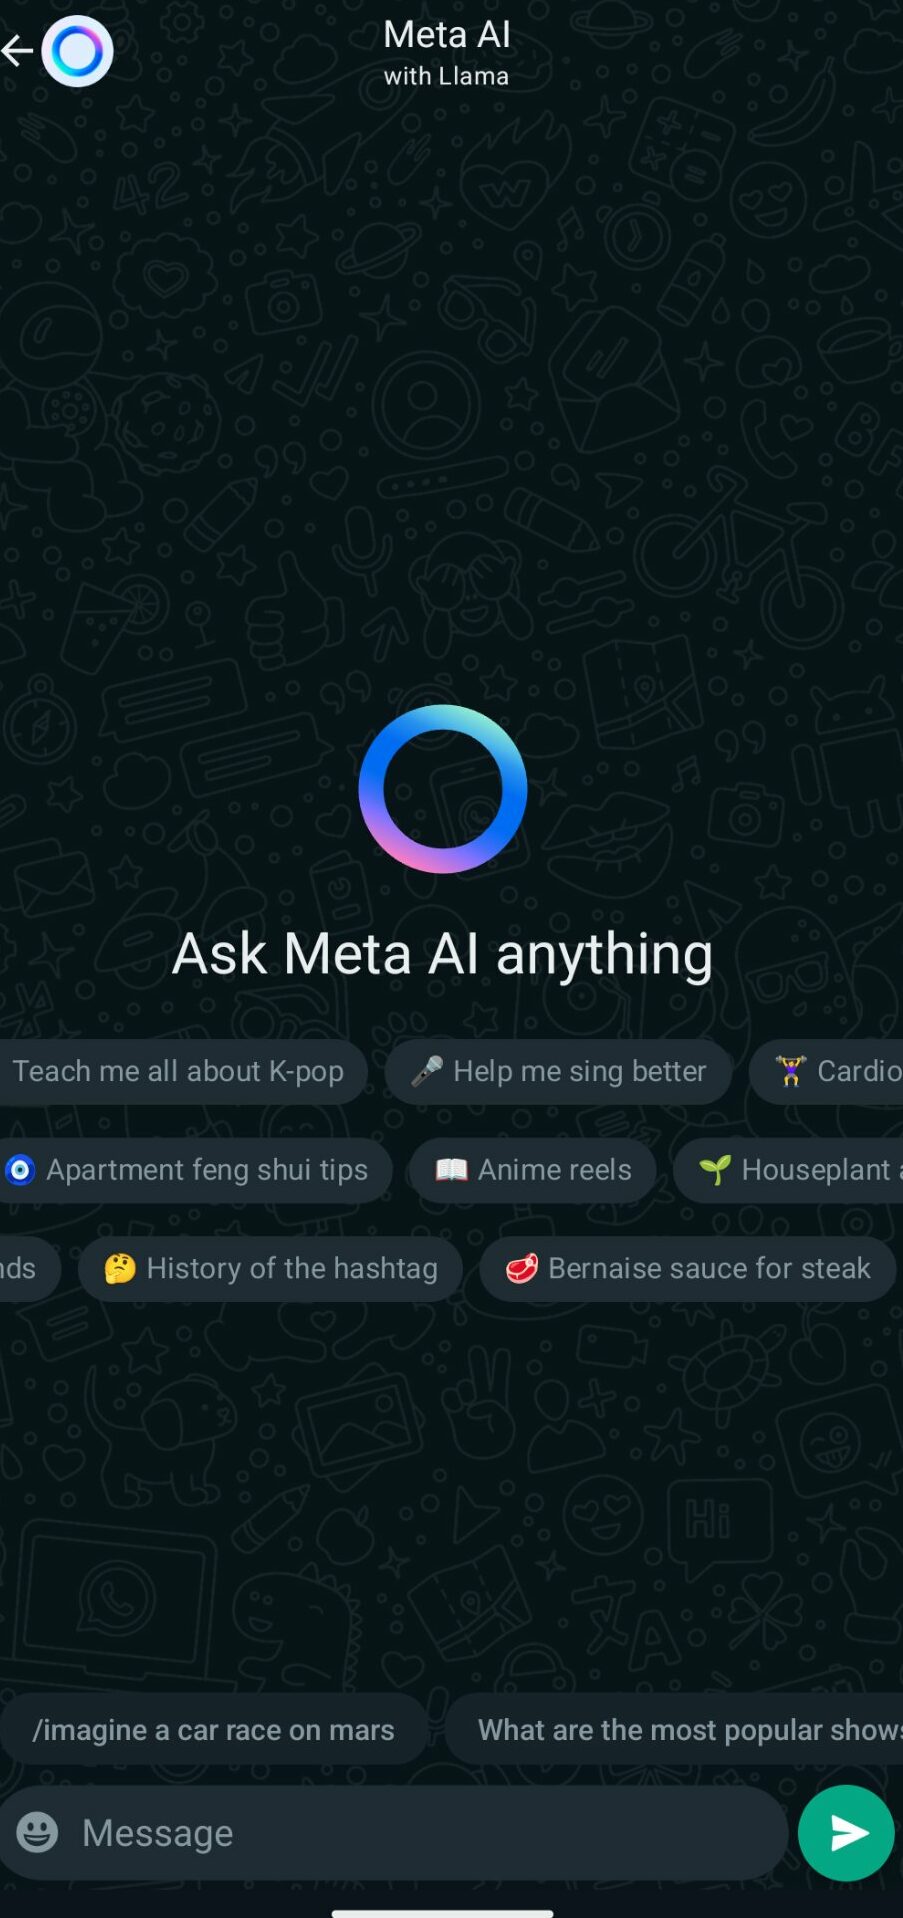 The feature called “Meta AI” is powered by the company’s open-source large language model, LLaMA (Large Language Model Meta AI).